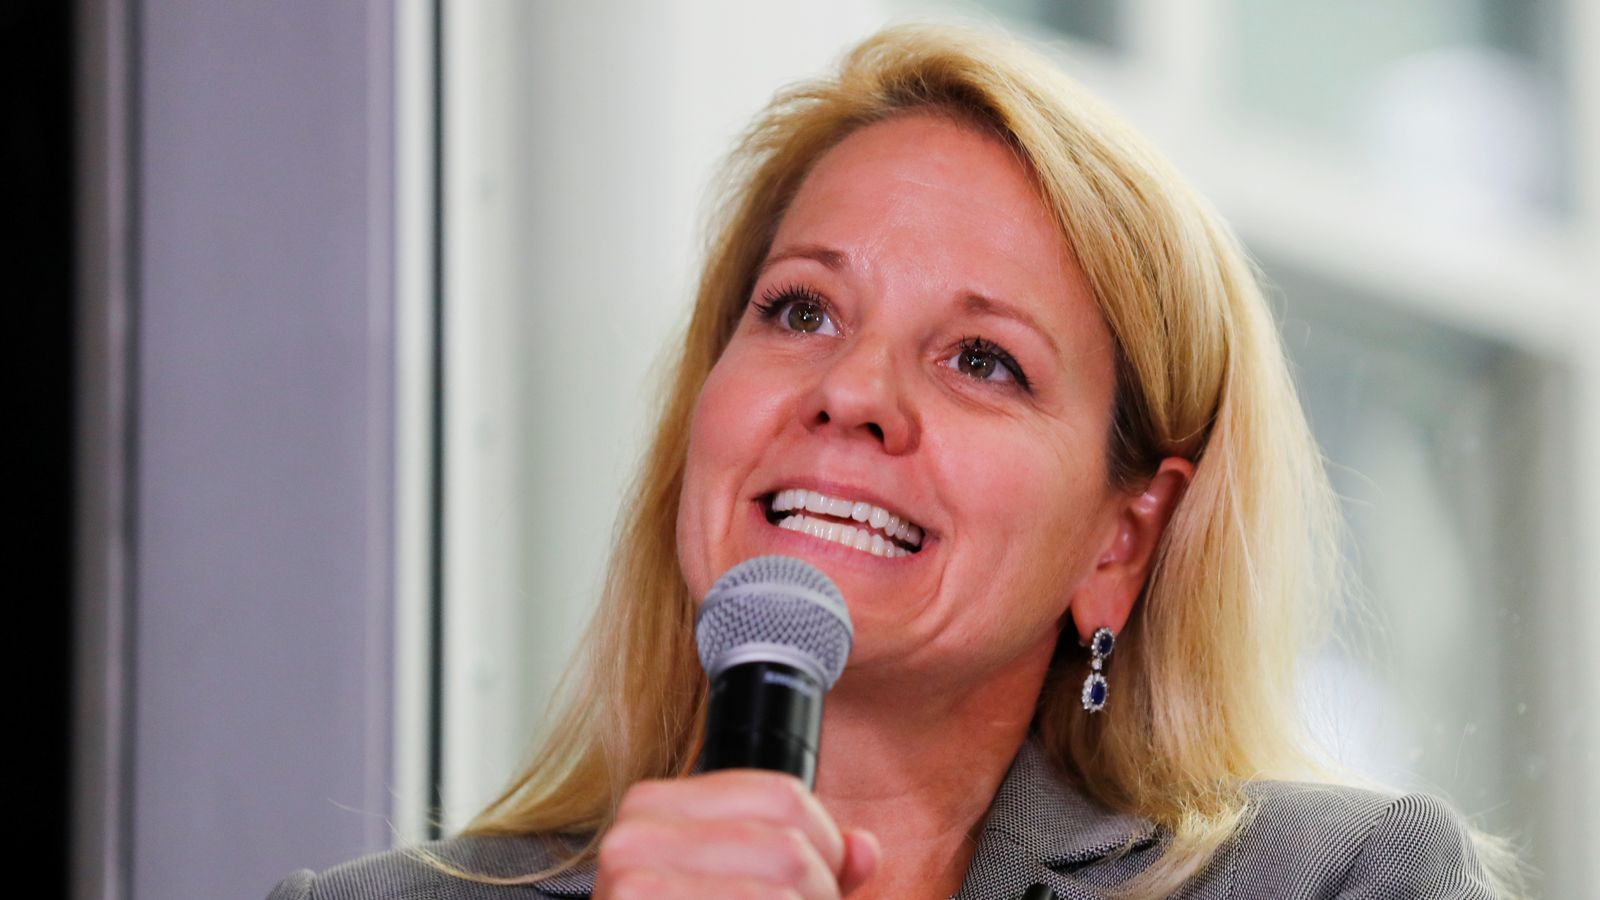 SpaceX president Gwynne Shotwell defends Elon Musk against sexual harassment allegations